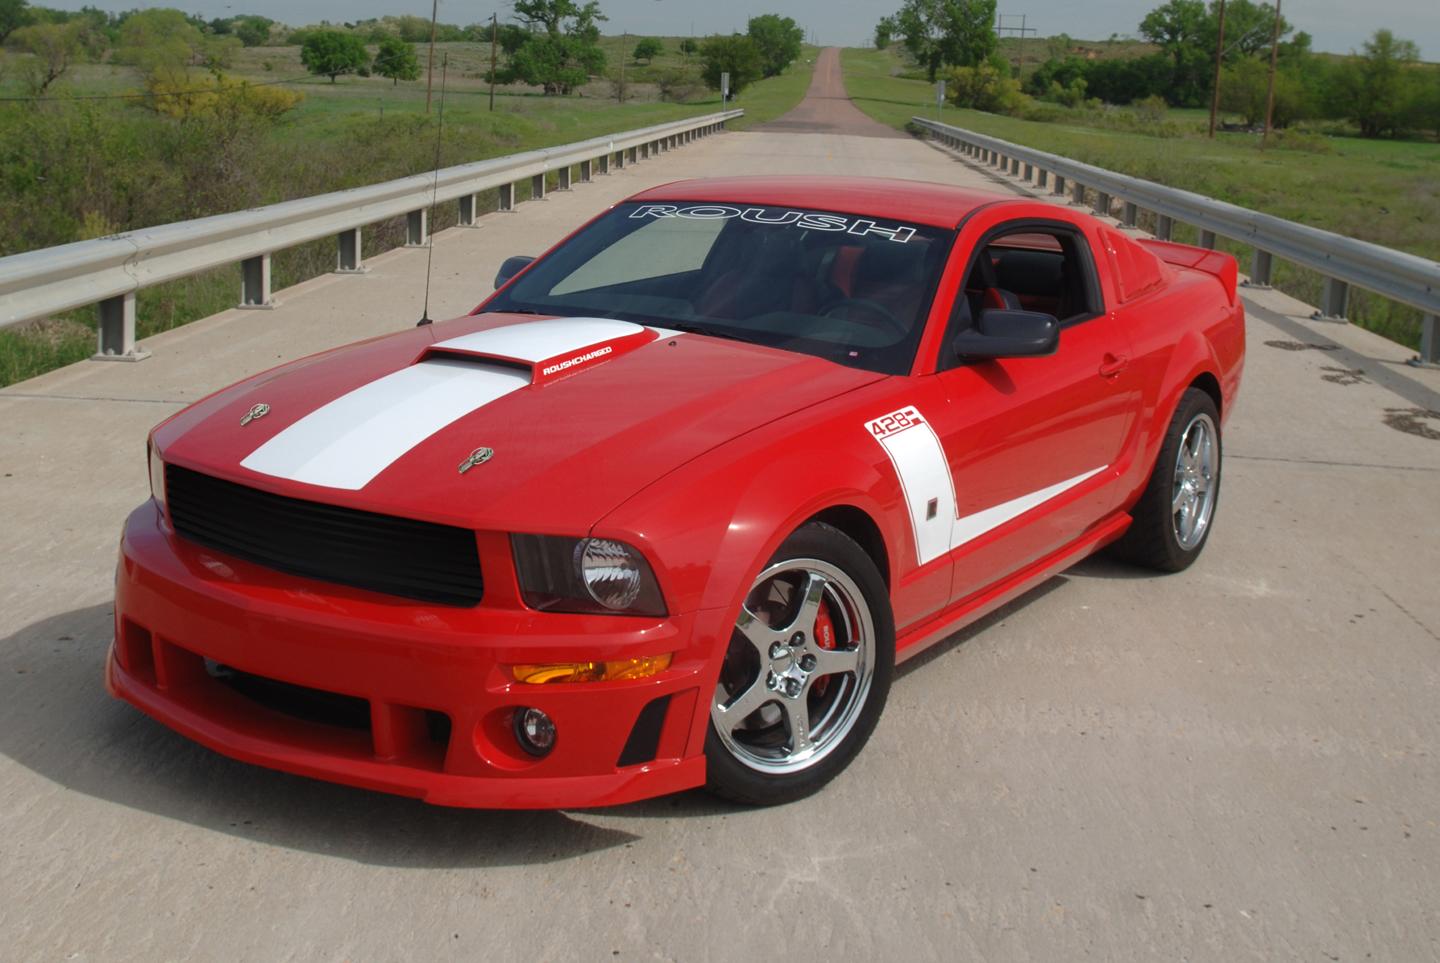 Мустанг р. Мустанг 428. Мустанг gt 428. Форд Мустанг 2008 года. Ford Mustang Roush 2005.